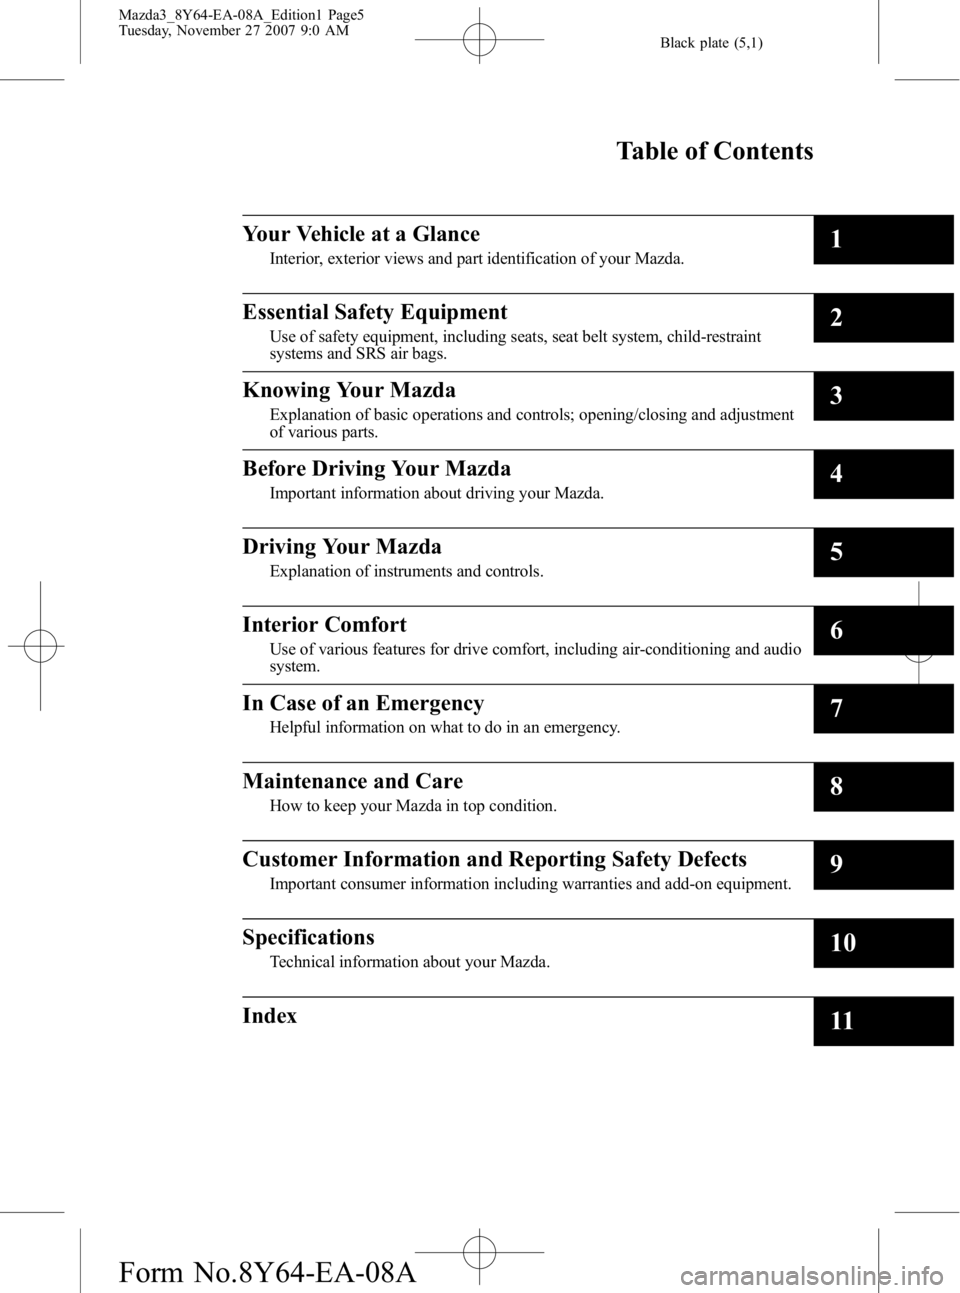 MAZDA MODEL 3 4-DOOR 2008  Owners Manual Black plate (5,1)
Mazda3_8Y64-EA-08A_Edition1 Page5
Tuesday, November 27 2007 9:0 AM
Form No.8Y64-EA-08A
Table of Contents
Your Vehicle at a Glance
Interior, exterior views and part identification of 